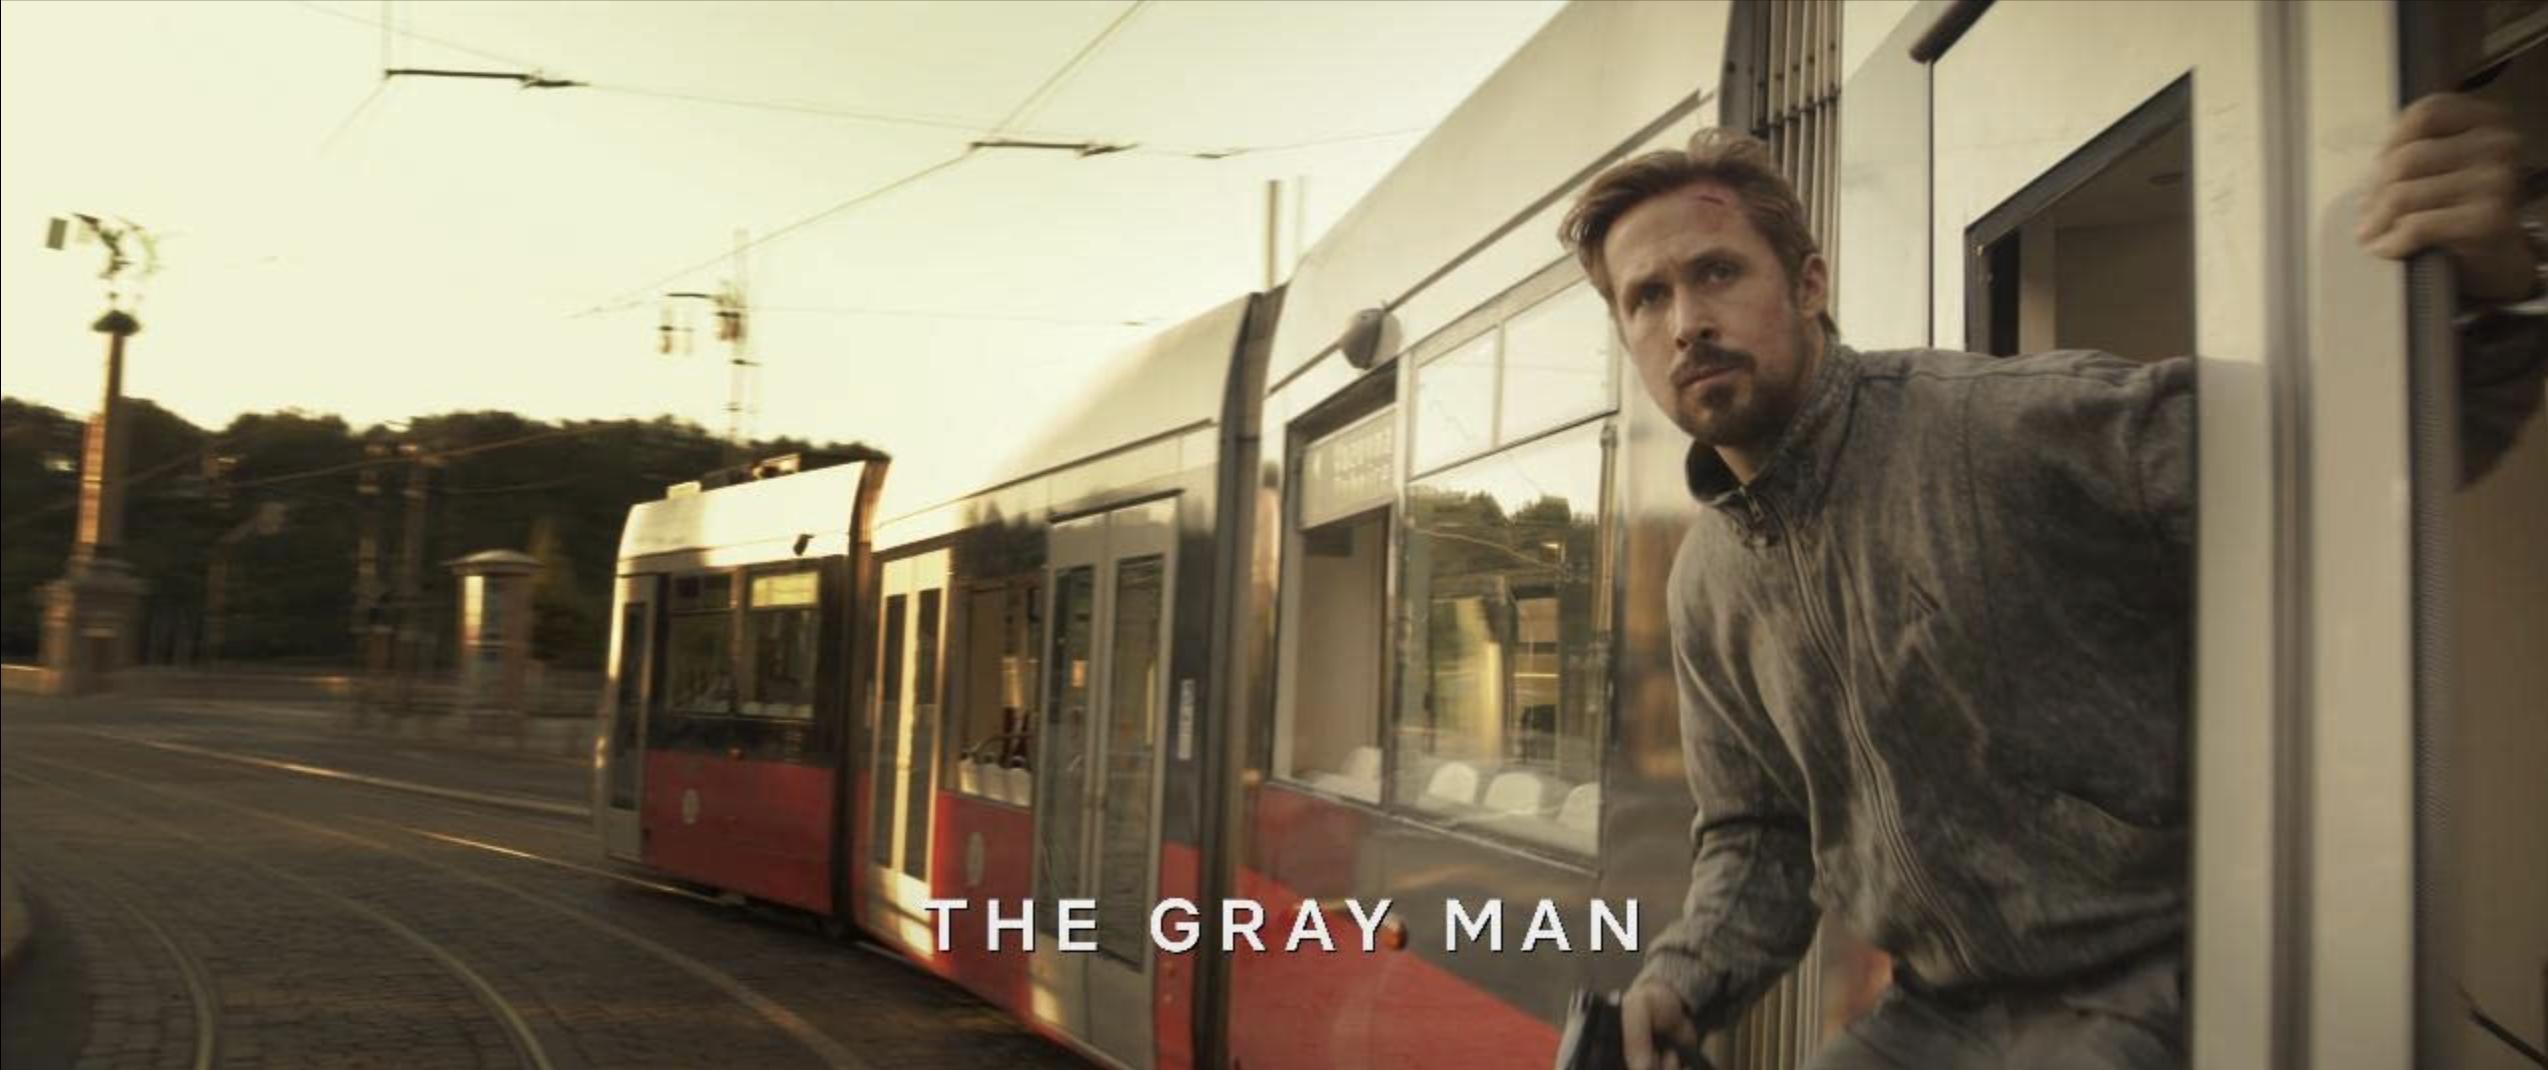 The Gray Man' Review: Guy vs. Guy - The New York Times